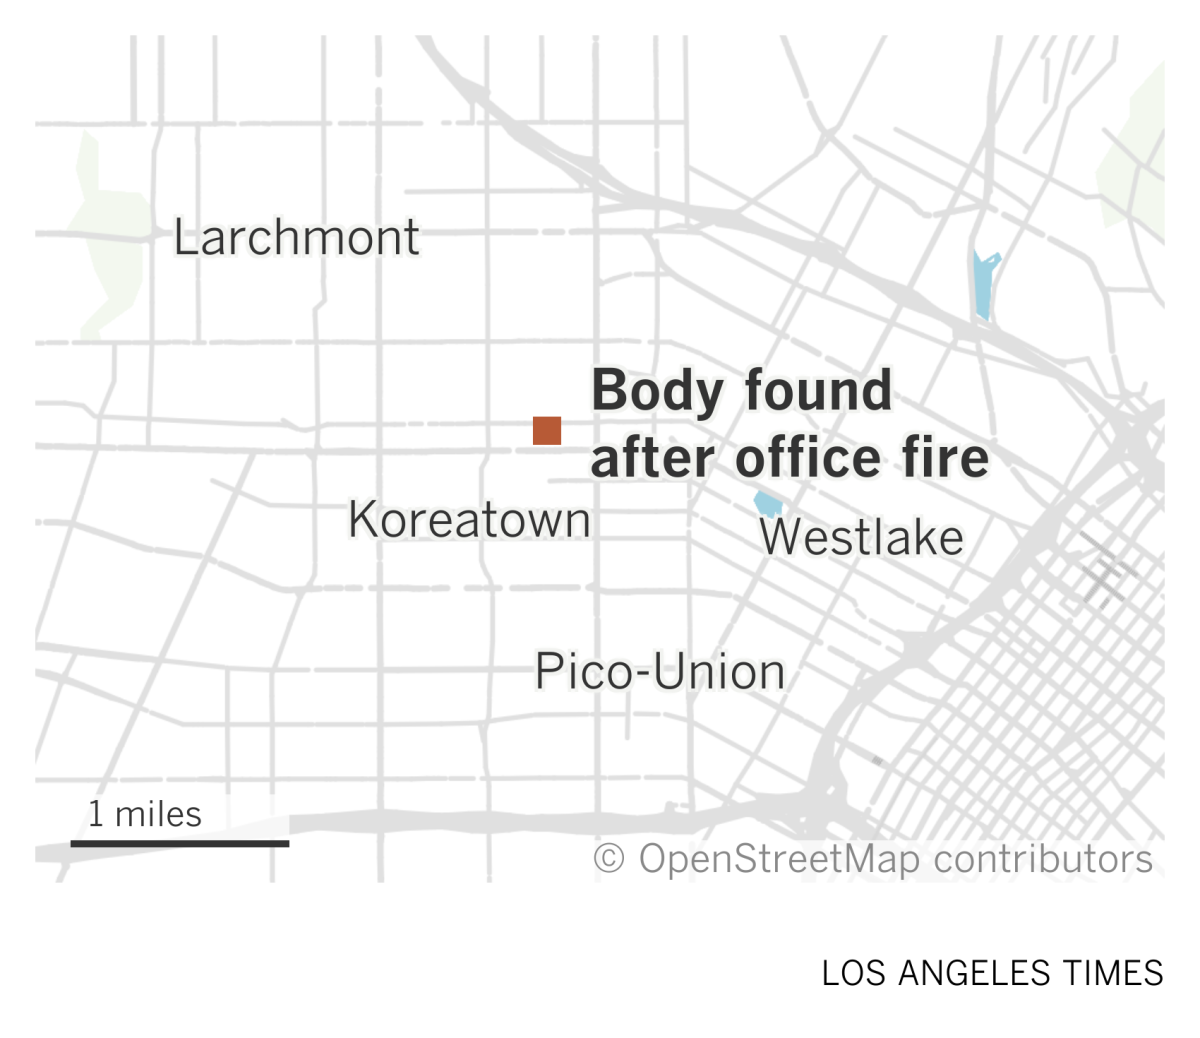 A map of central Los Angeles shows where a body was found after an office fire in Koreatown